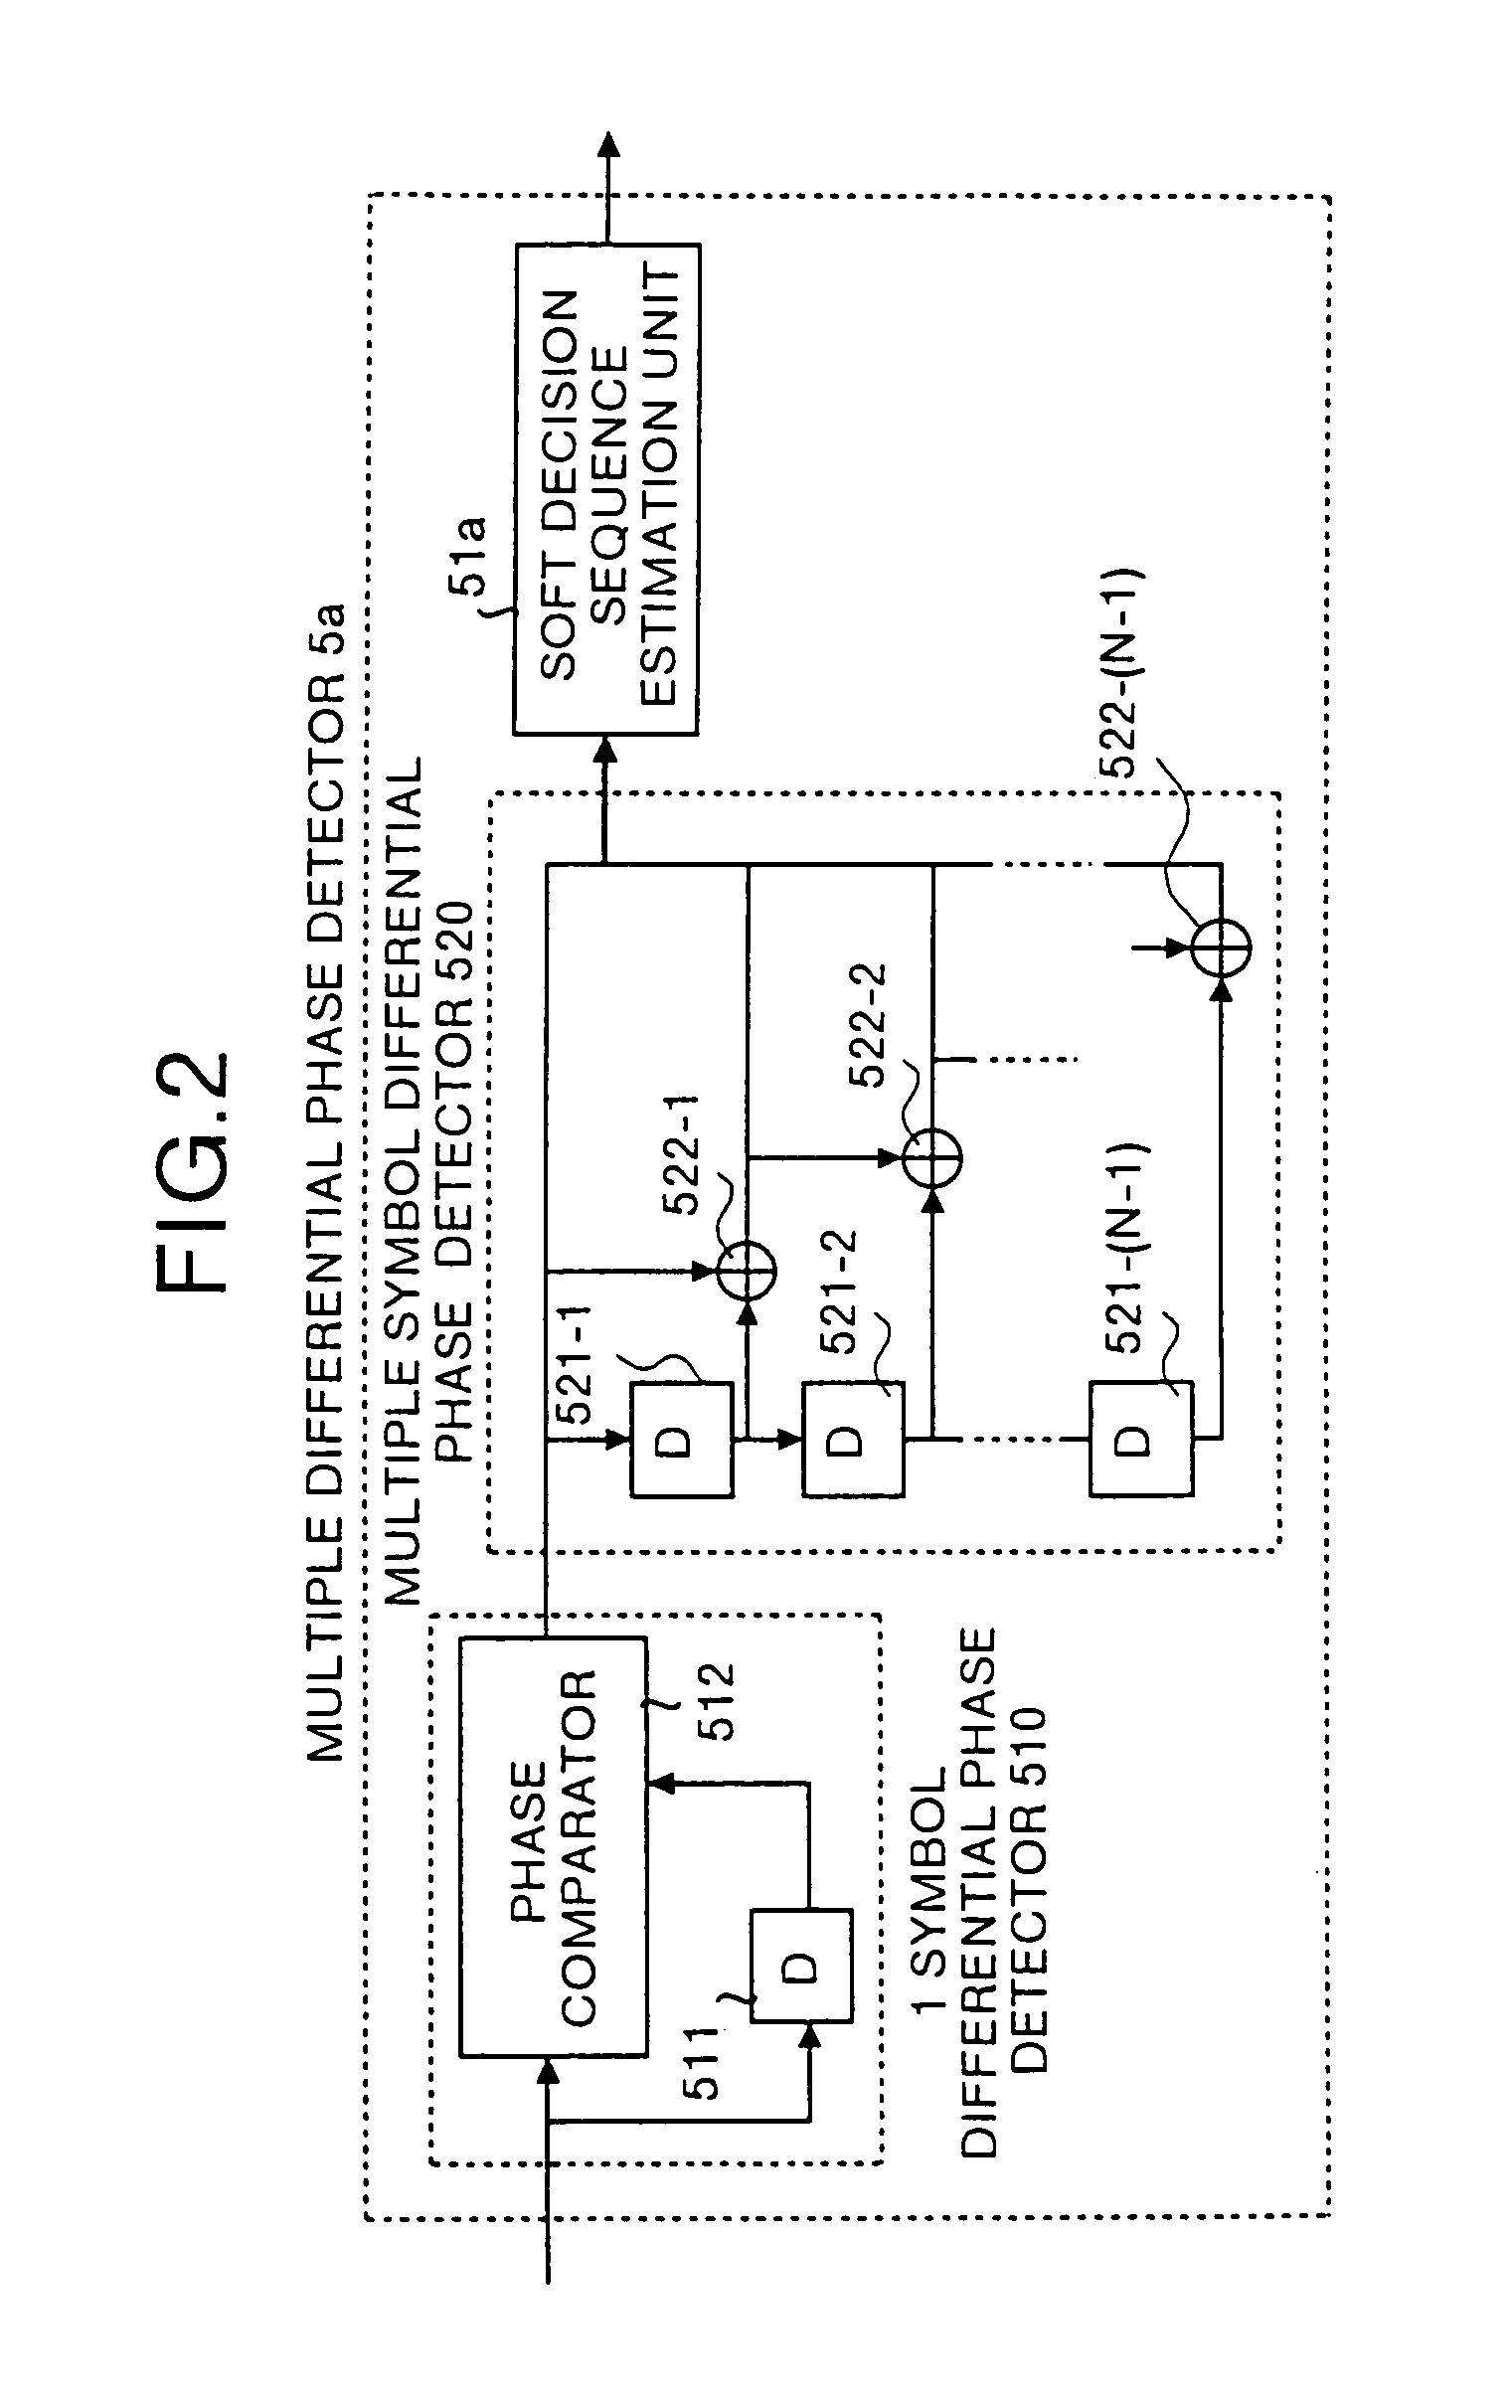 Demodulator, receiver, and communication system